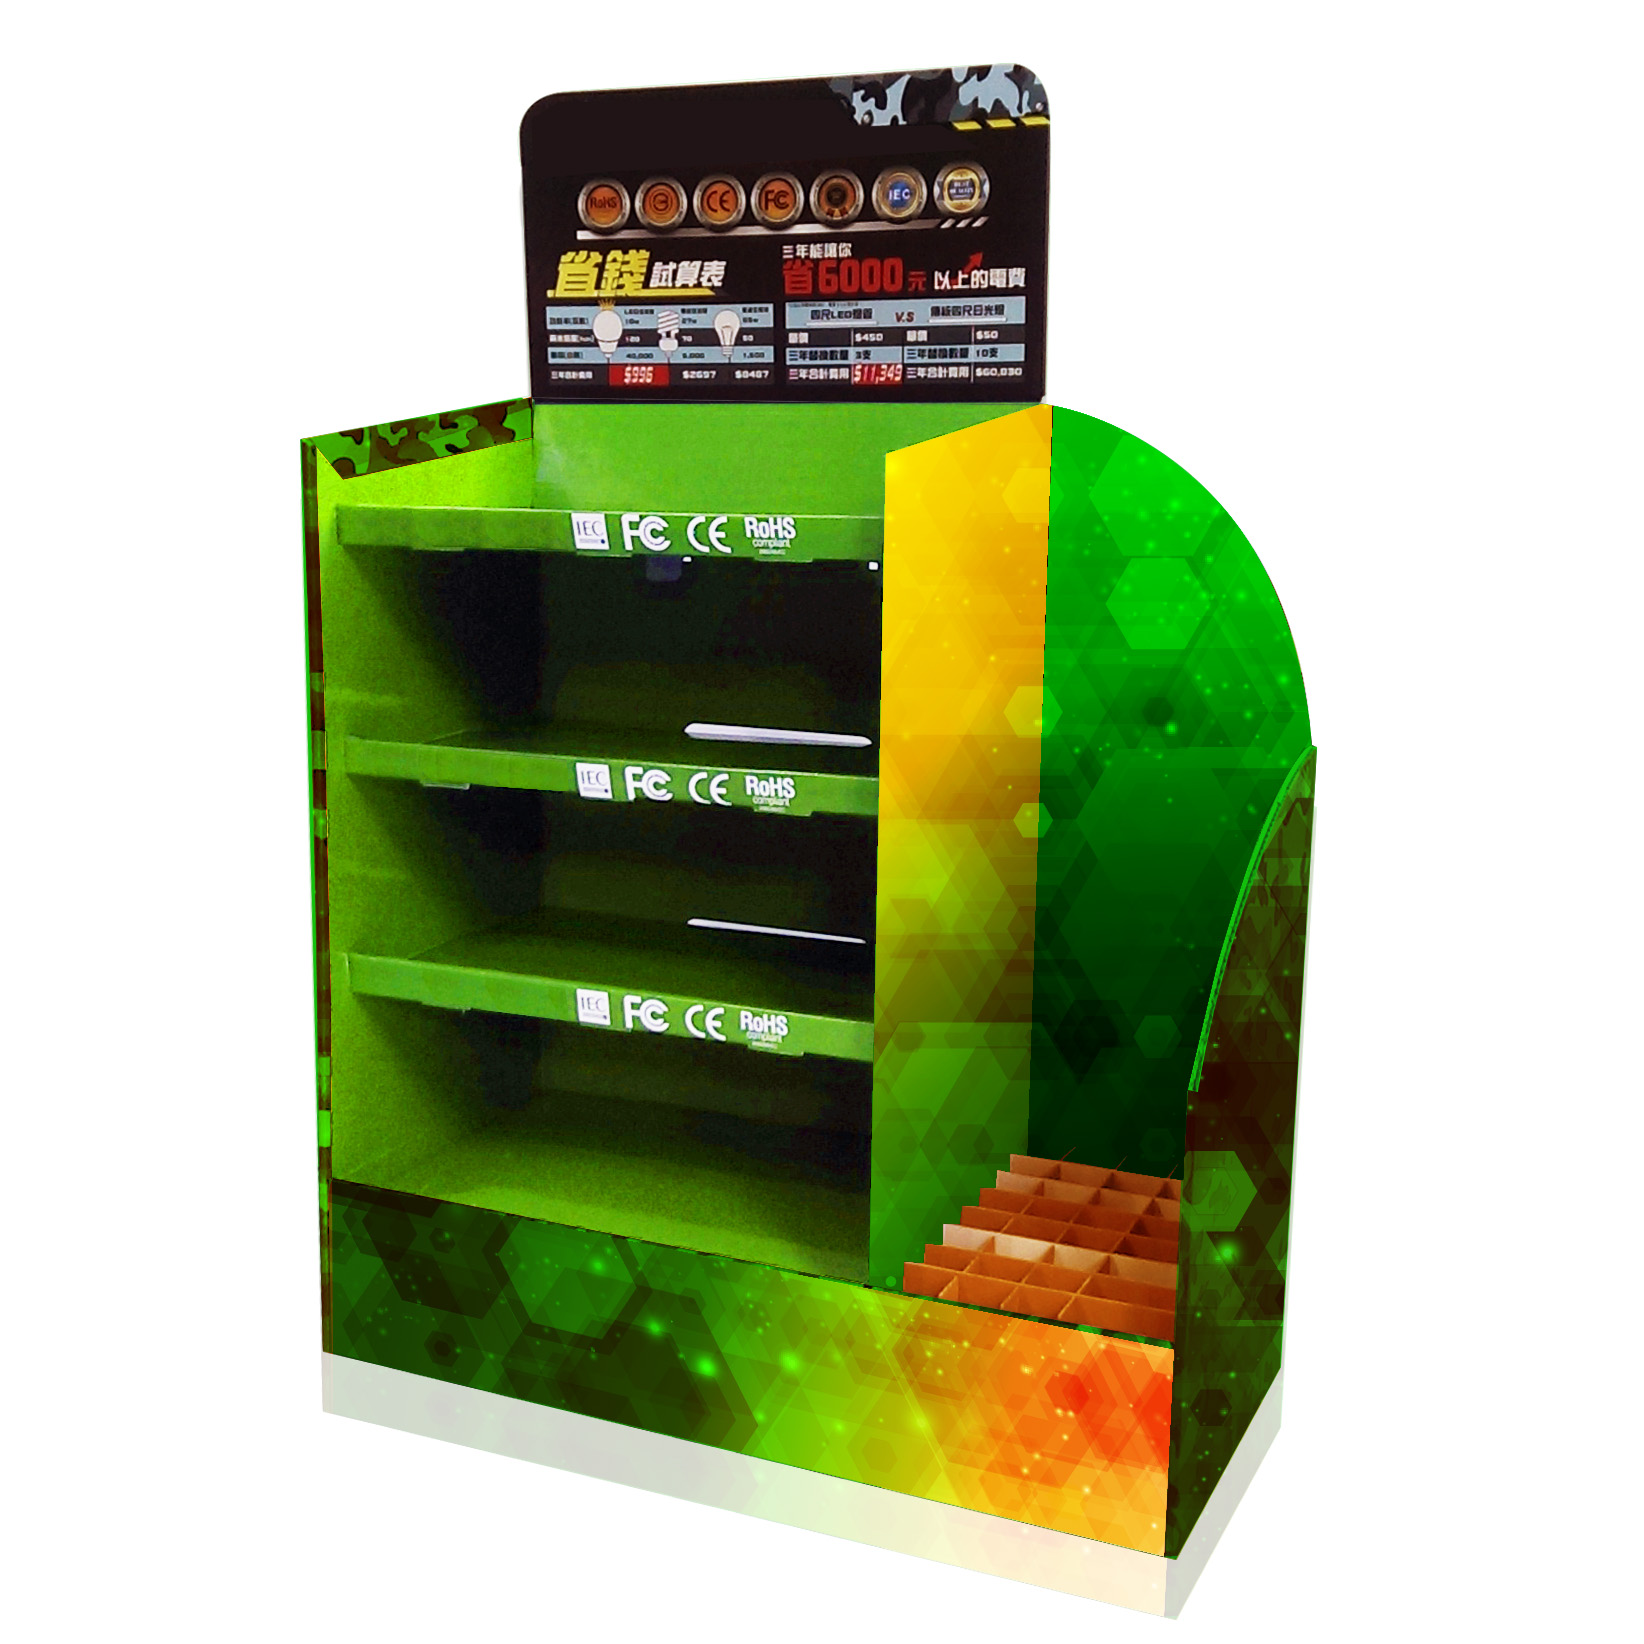 A-56 Floor display stand